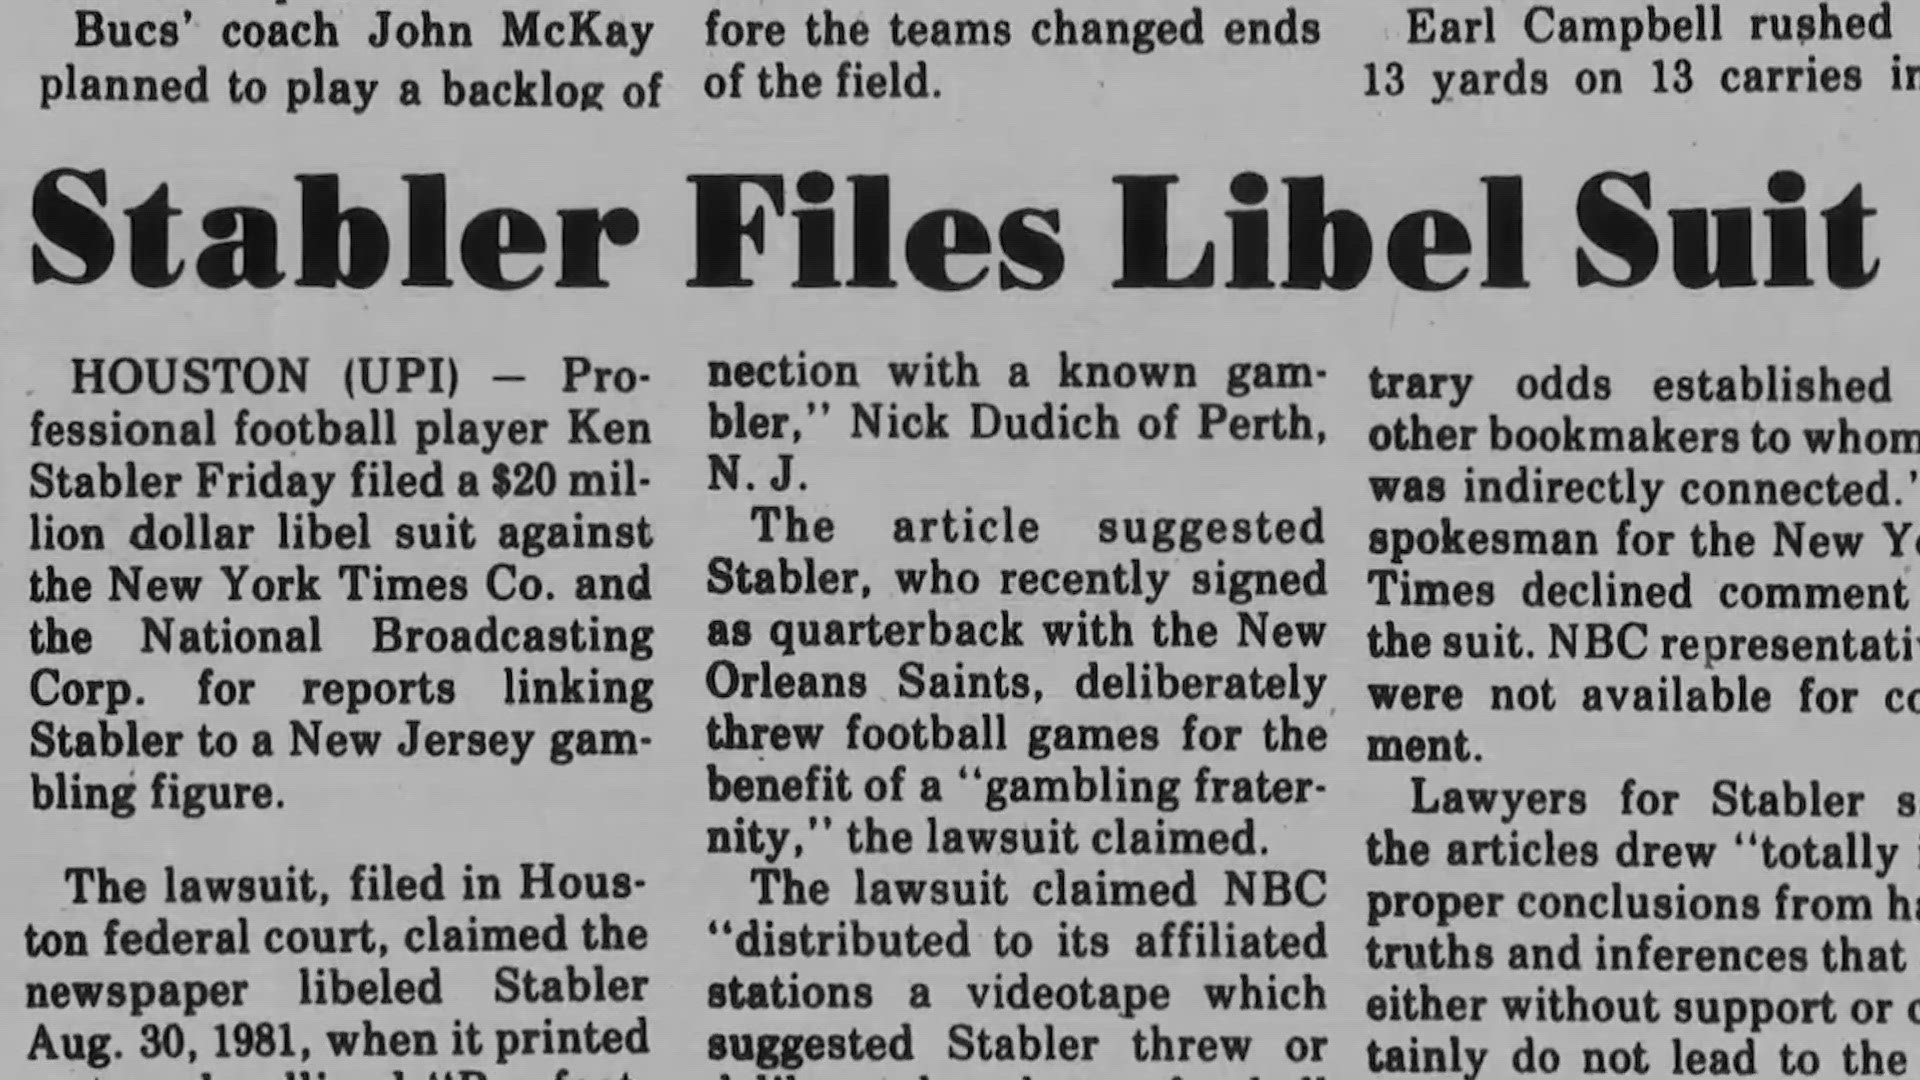 Before coming to Houston, he was a Raider. A villain, but not a cheater. He then sued to clear his name.